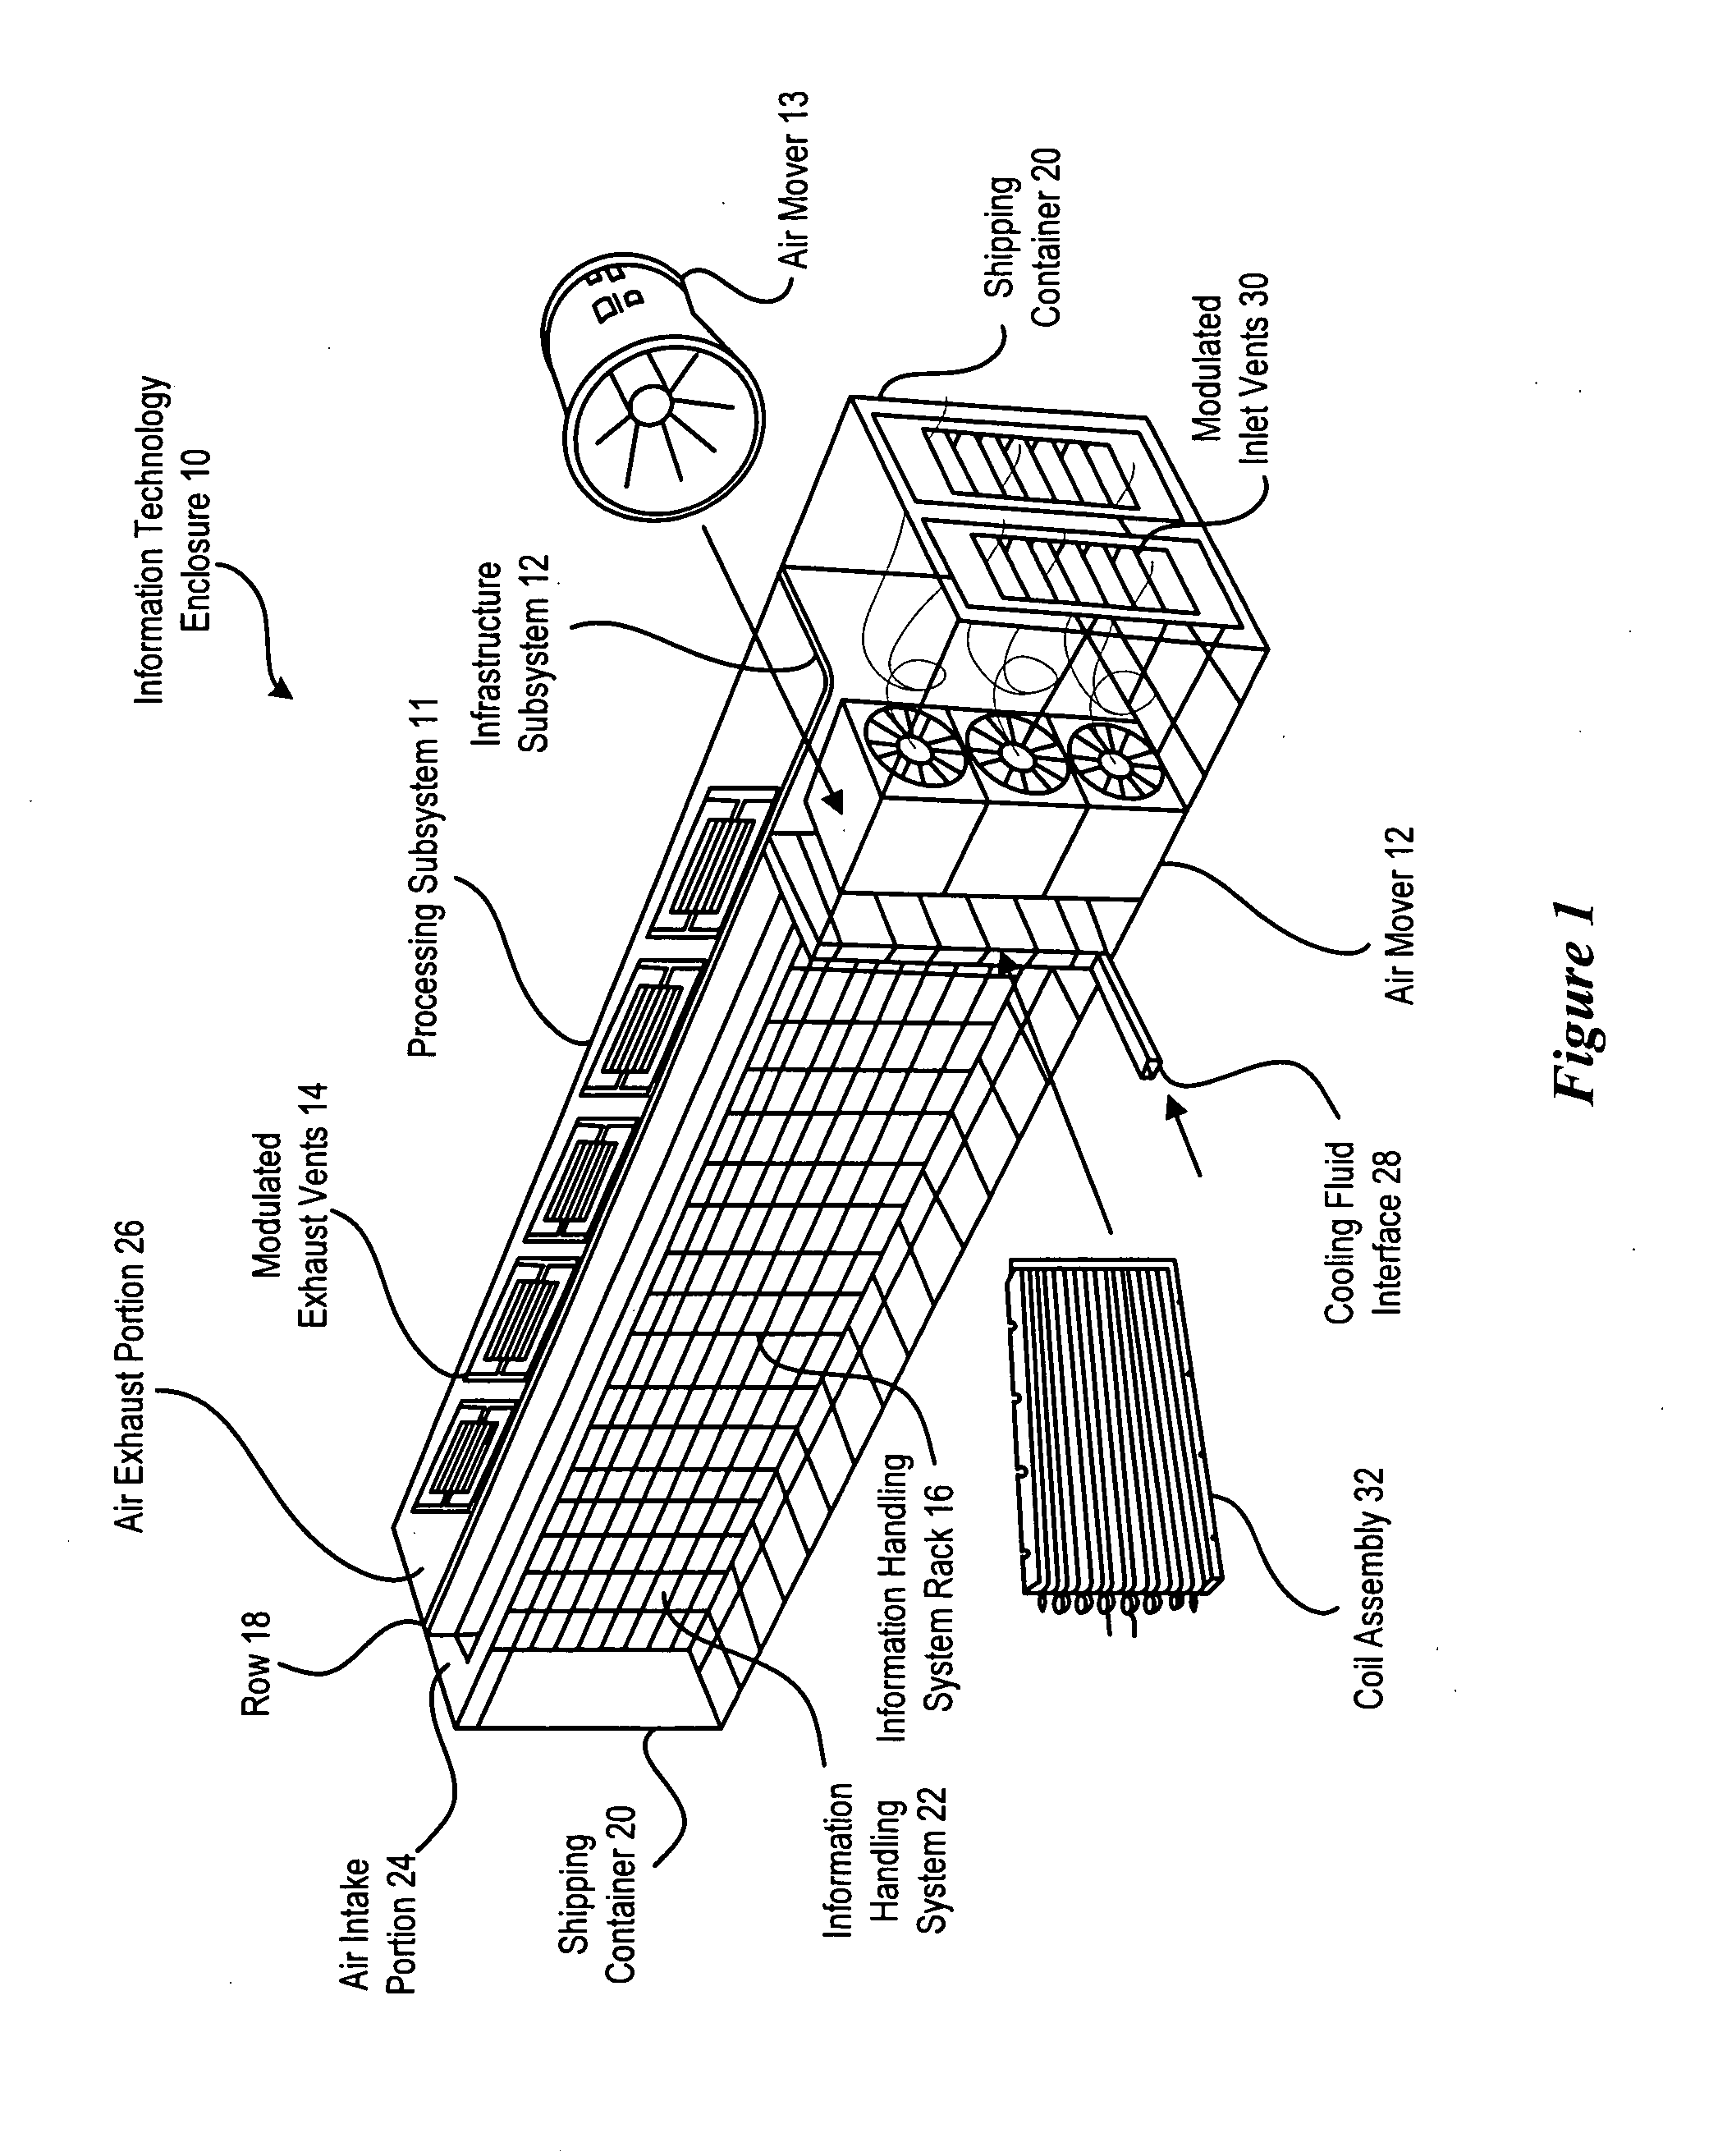 System and Method For Vertically Stacked Information Handling System and Infrastructure Enclosures